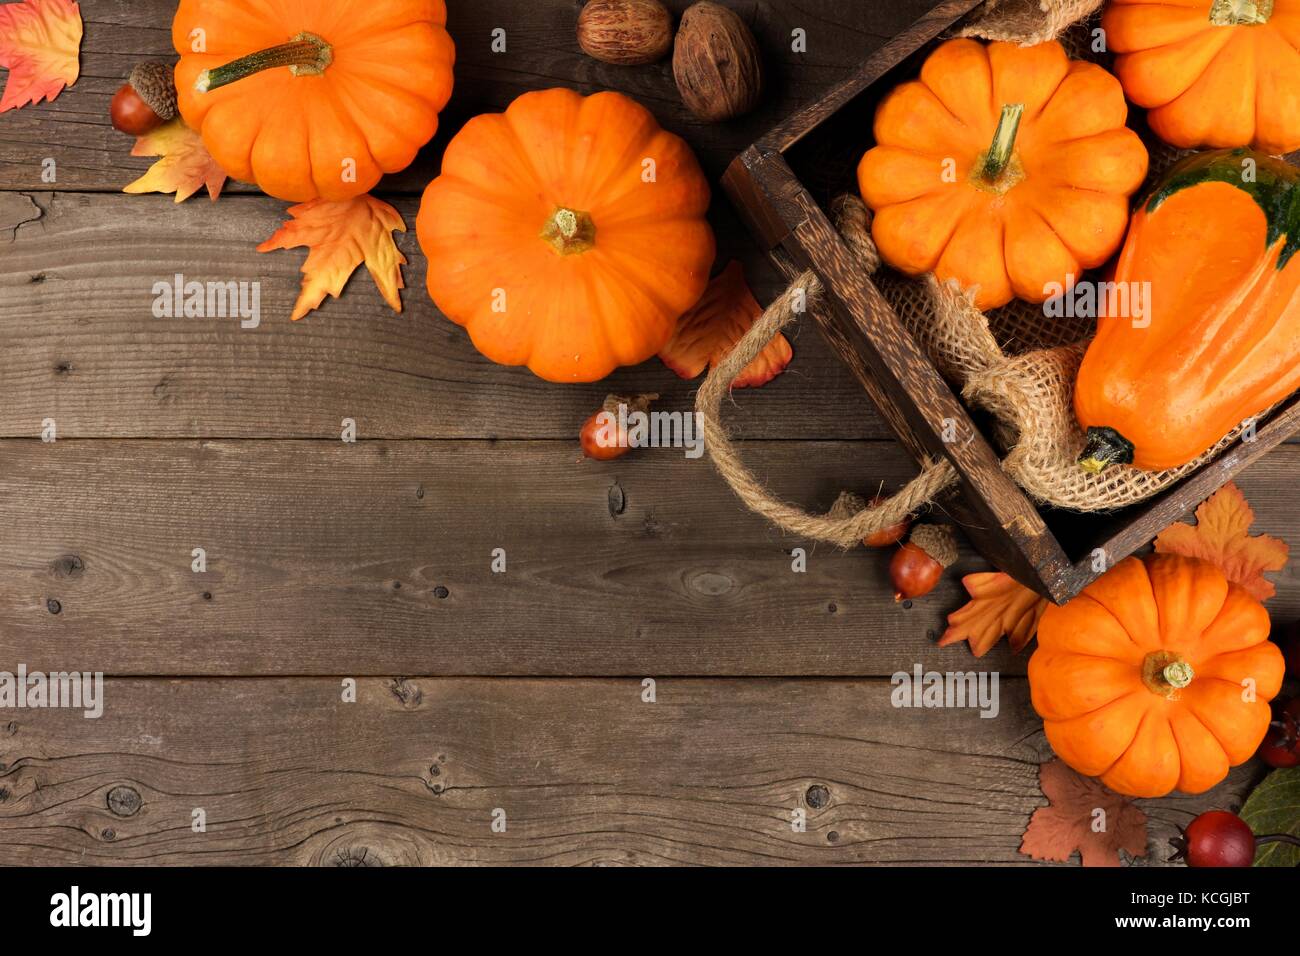 Autumn corner arrangement of leaves and a crate of pumpkins over a rustic wood background Stock Photo